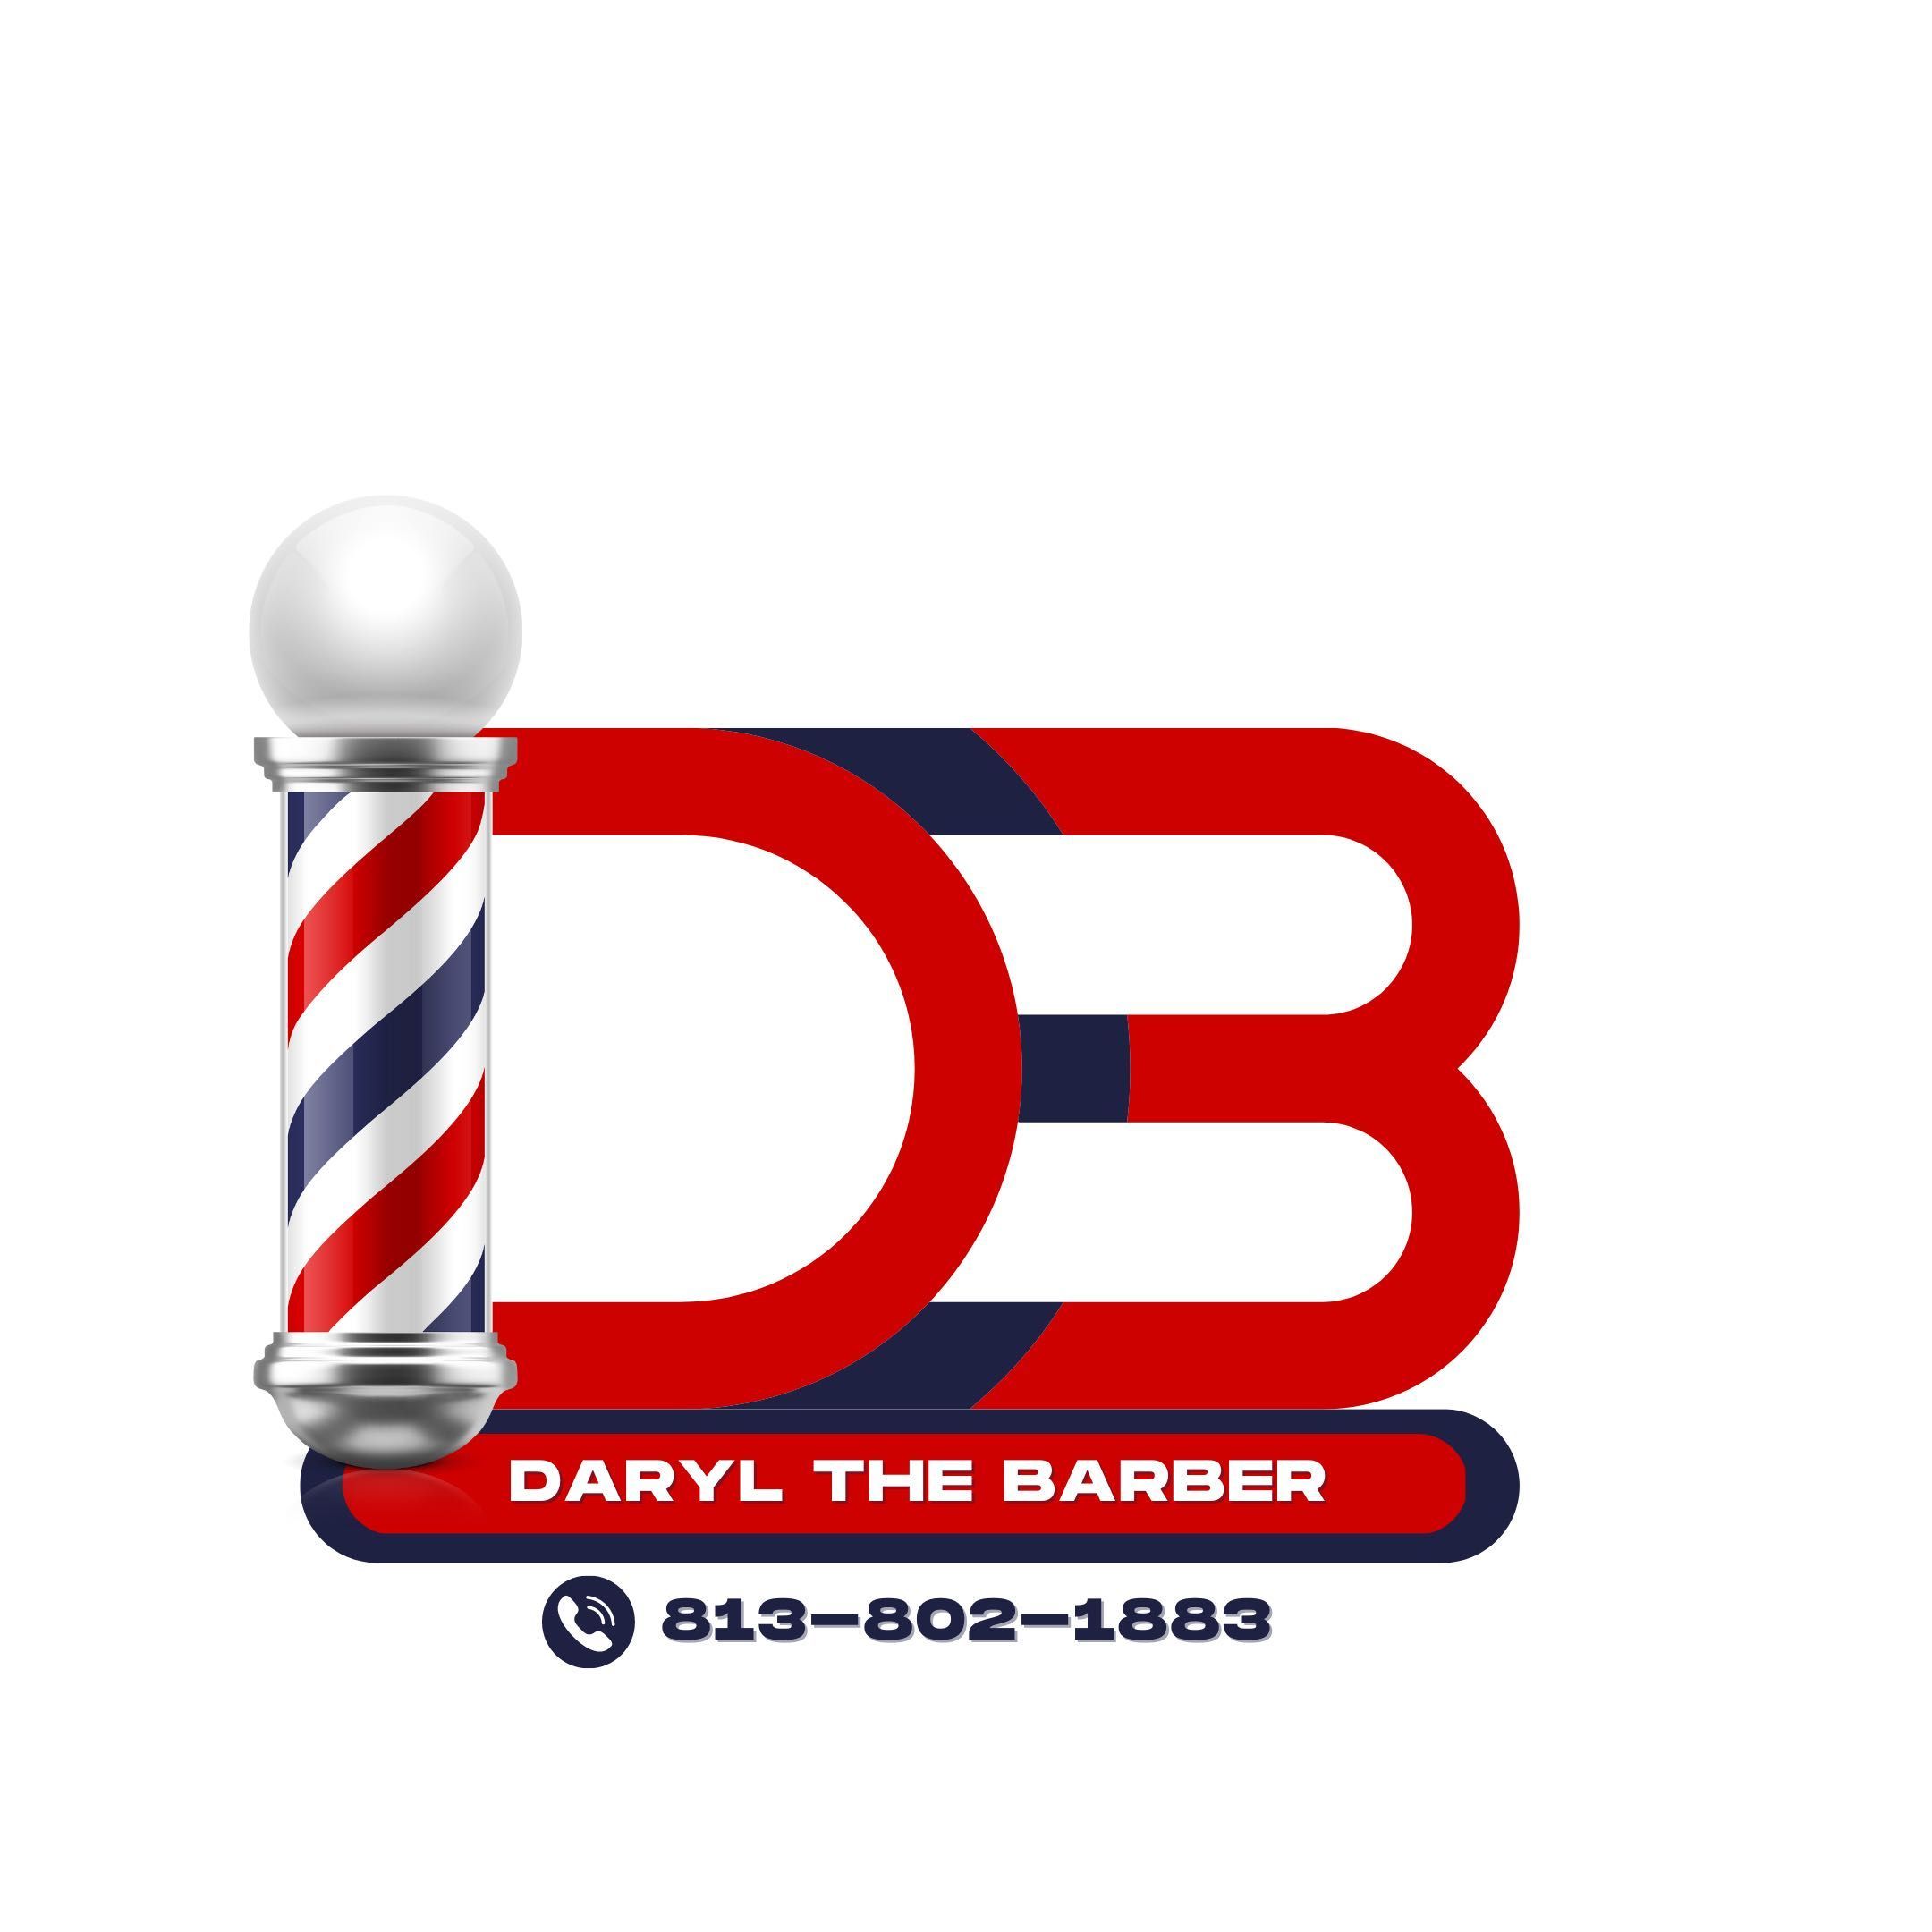 Daryl The Barber, 130 W Fletcher Ave, Tampa, 33612